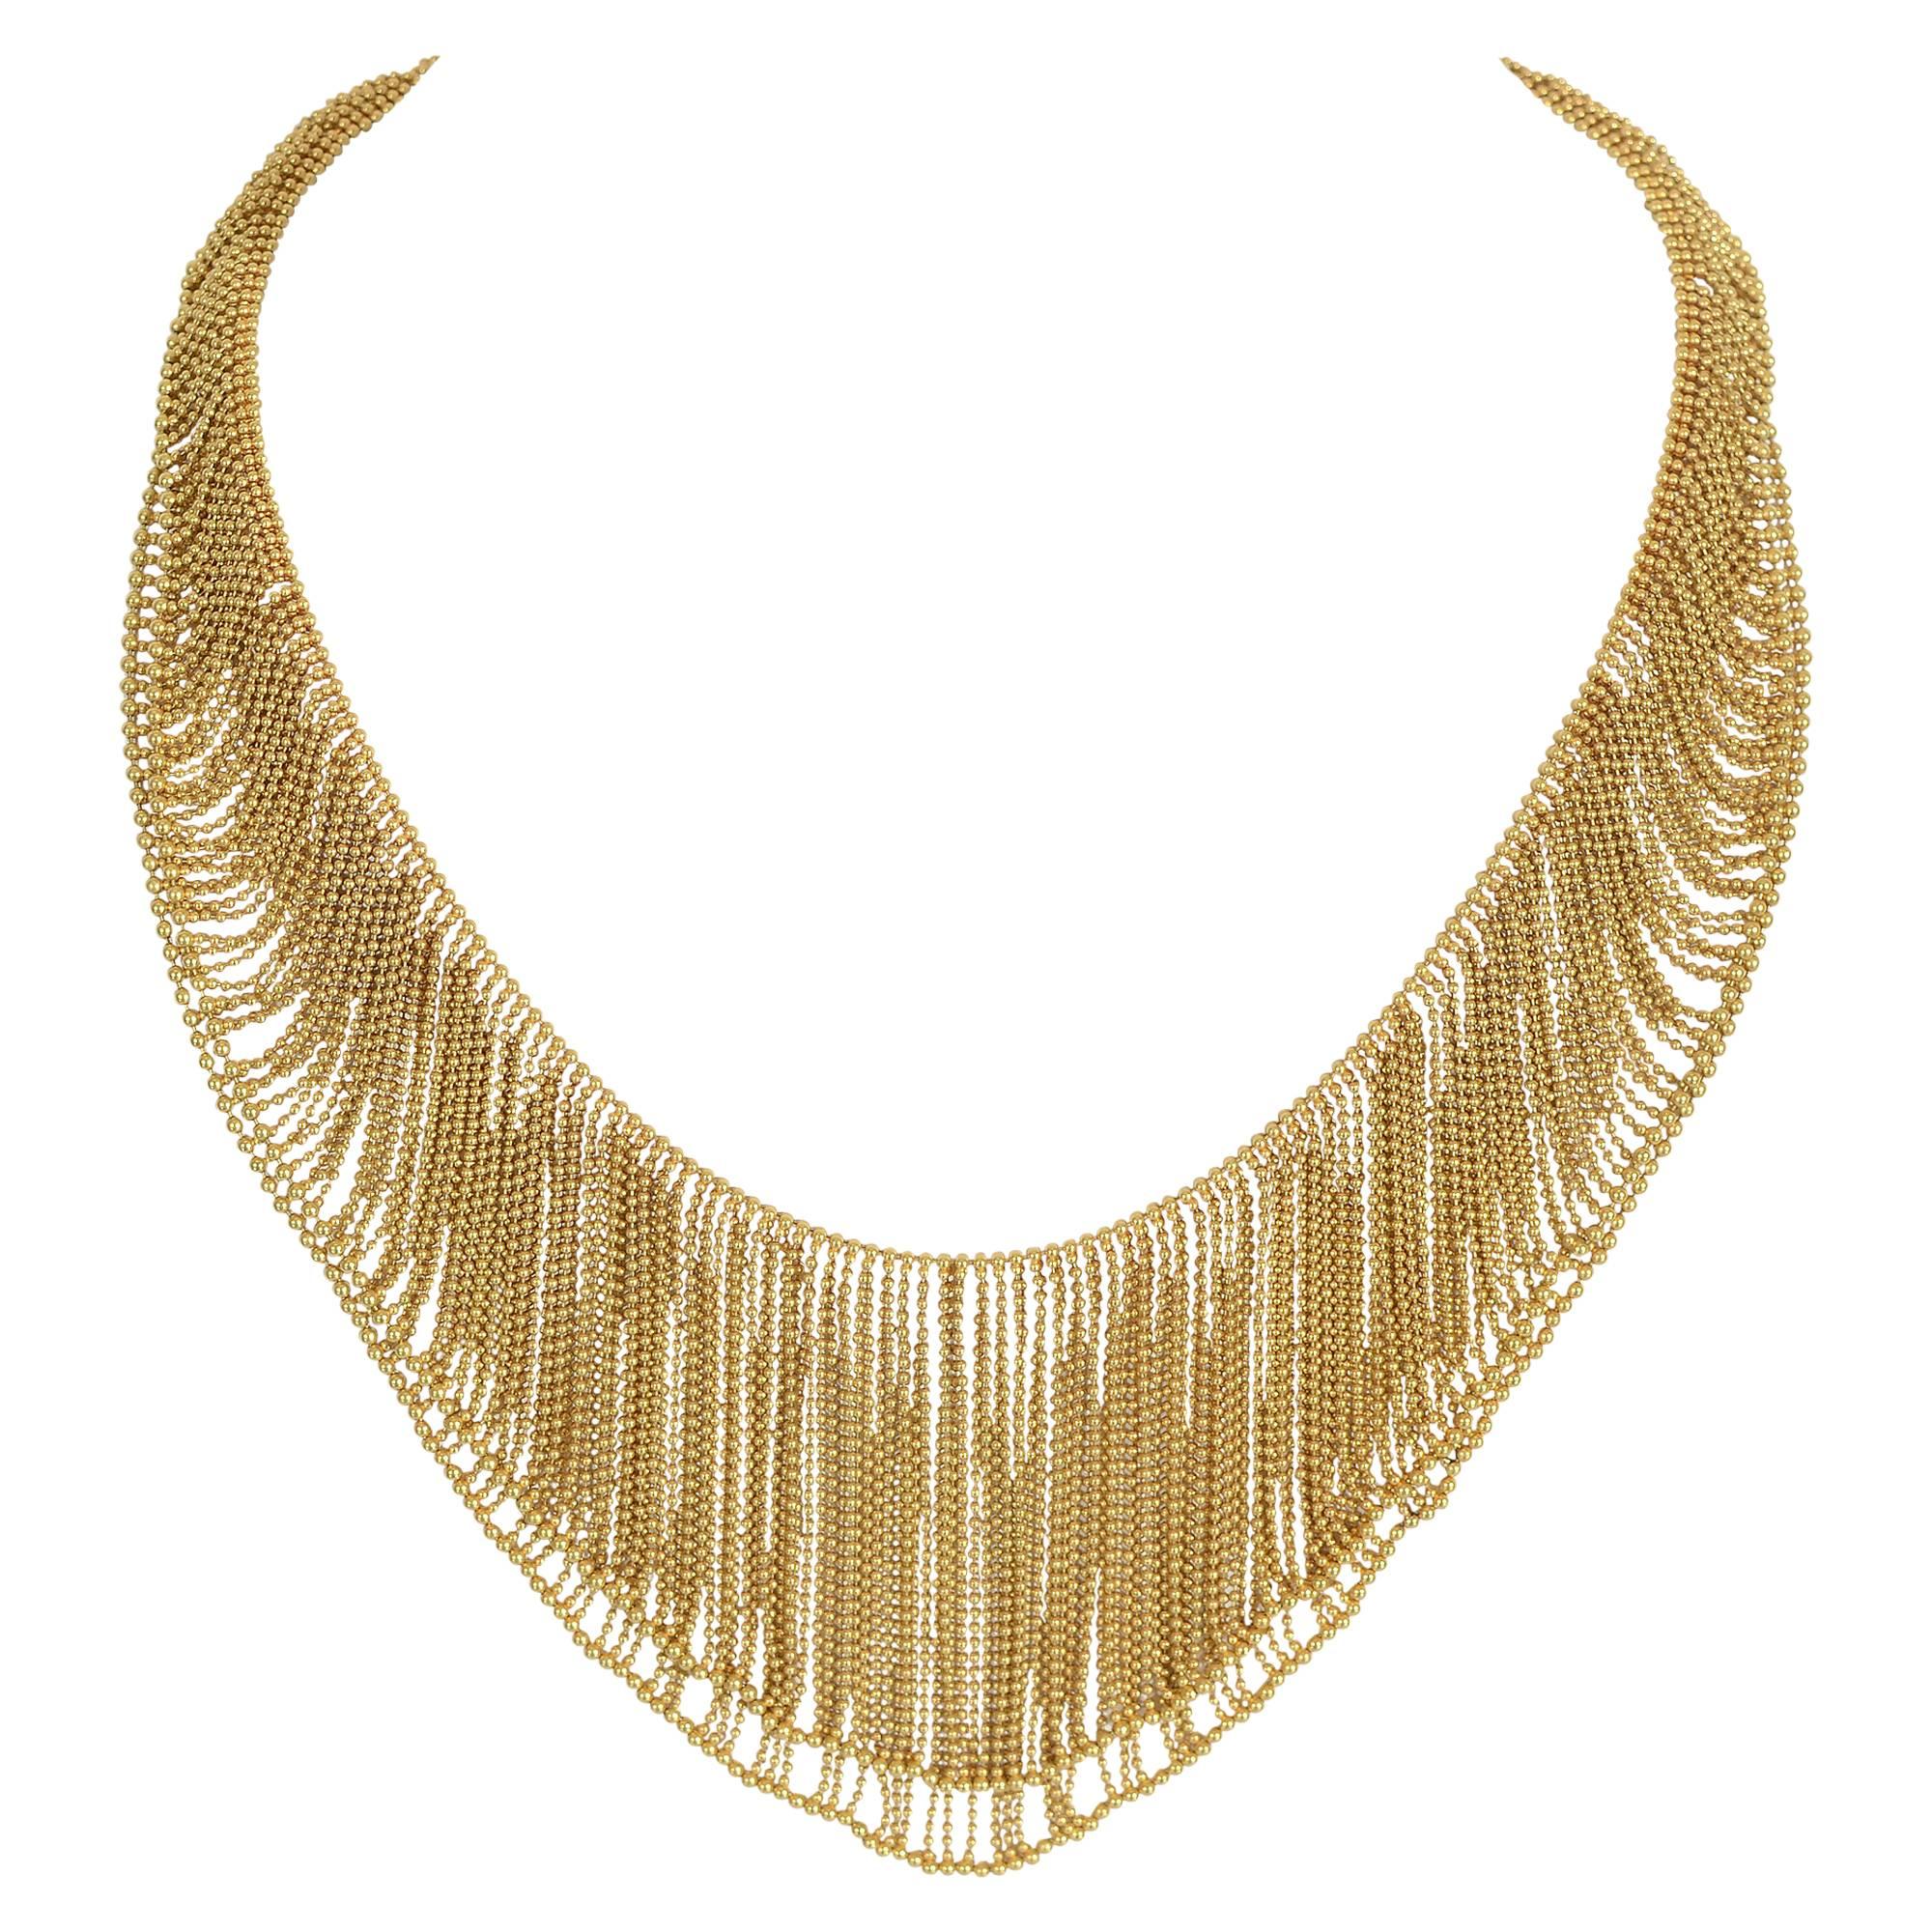 H. Stern Gold Mesh Necklace